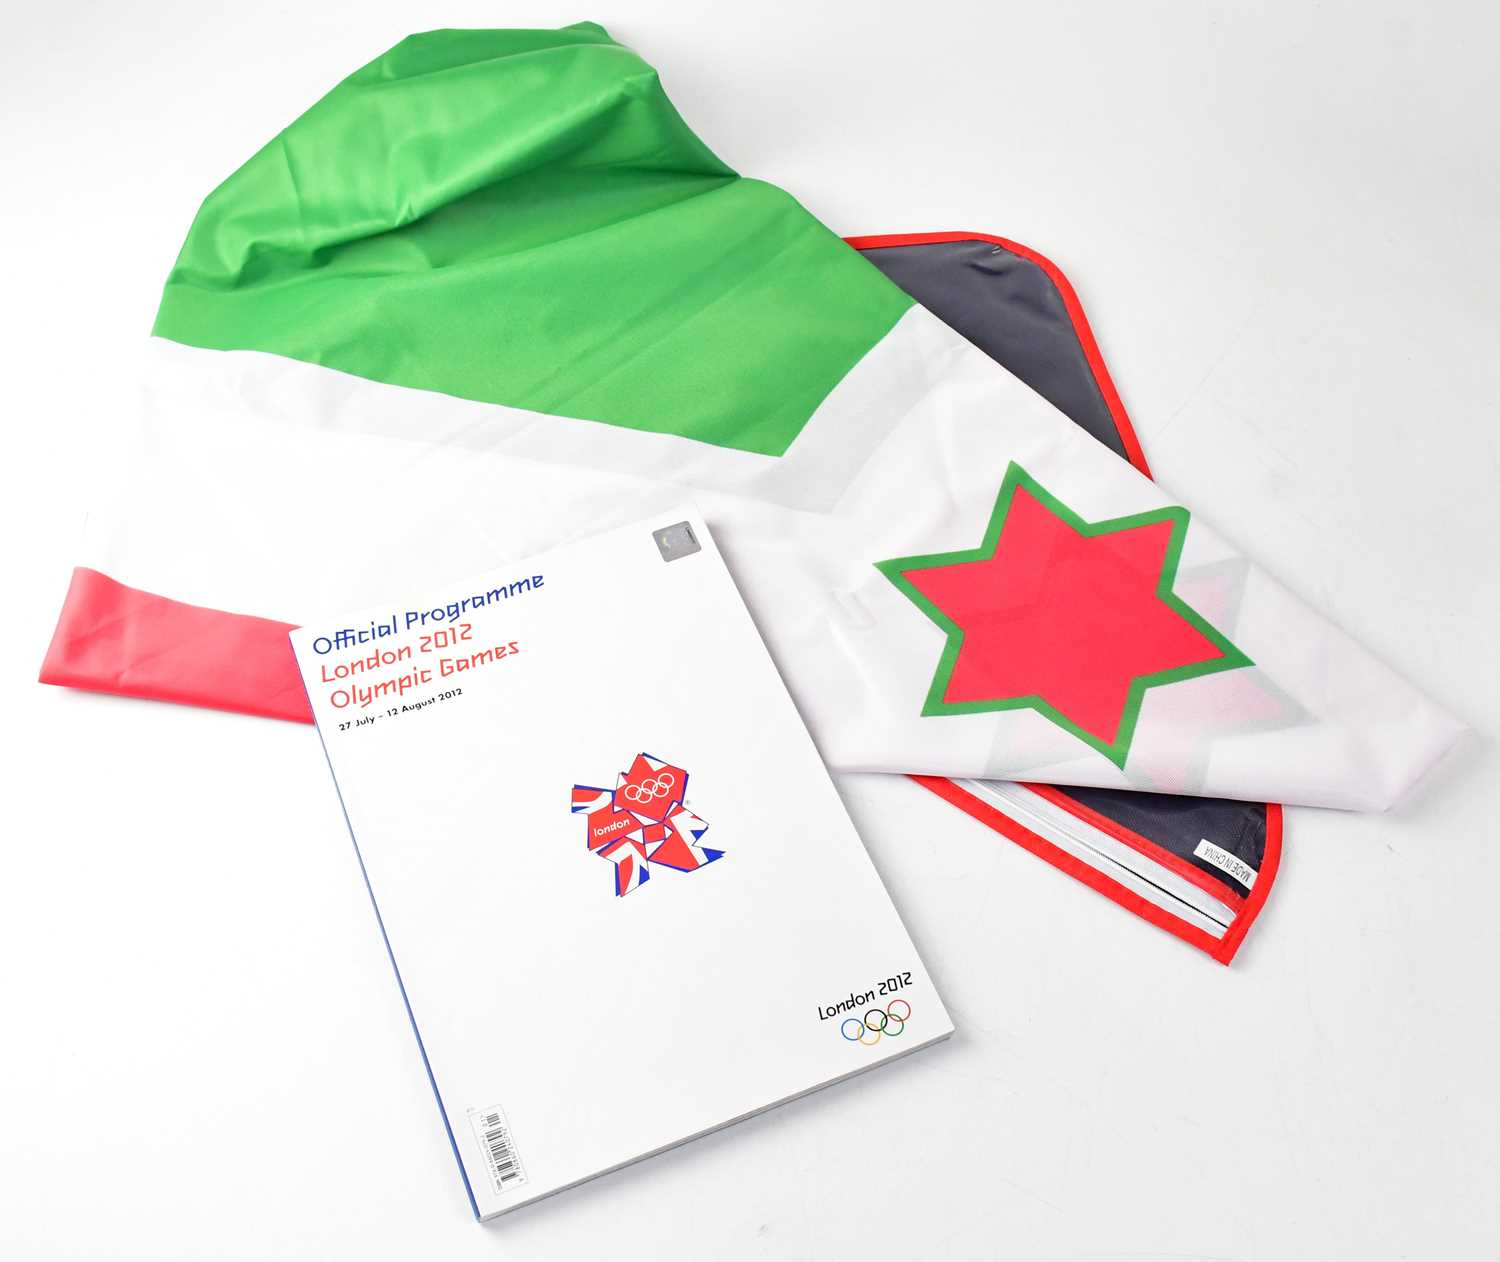 OLYMPIC GAMES; a Burundi flag used in the 2012 London Olympic Games opening ceremony, with